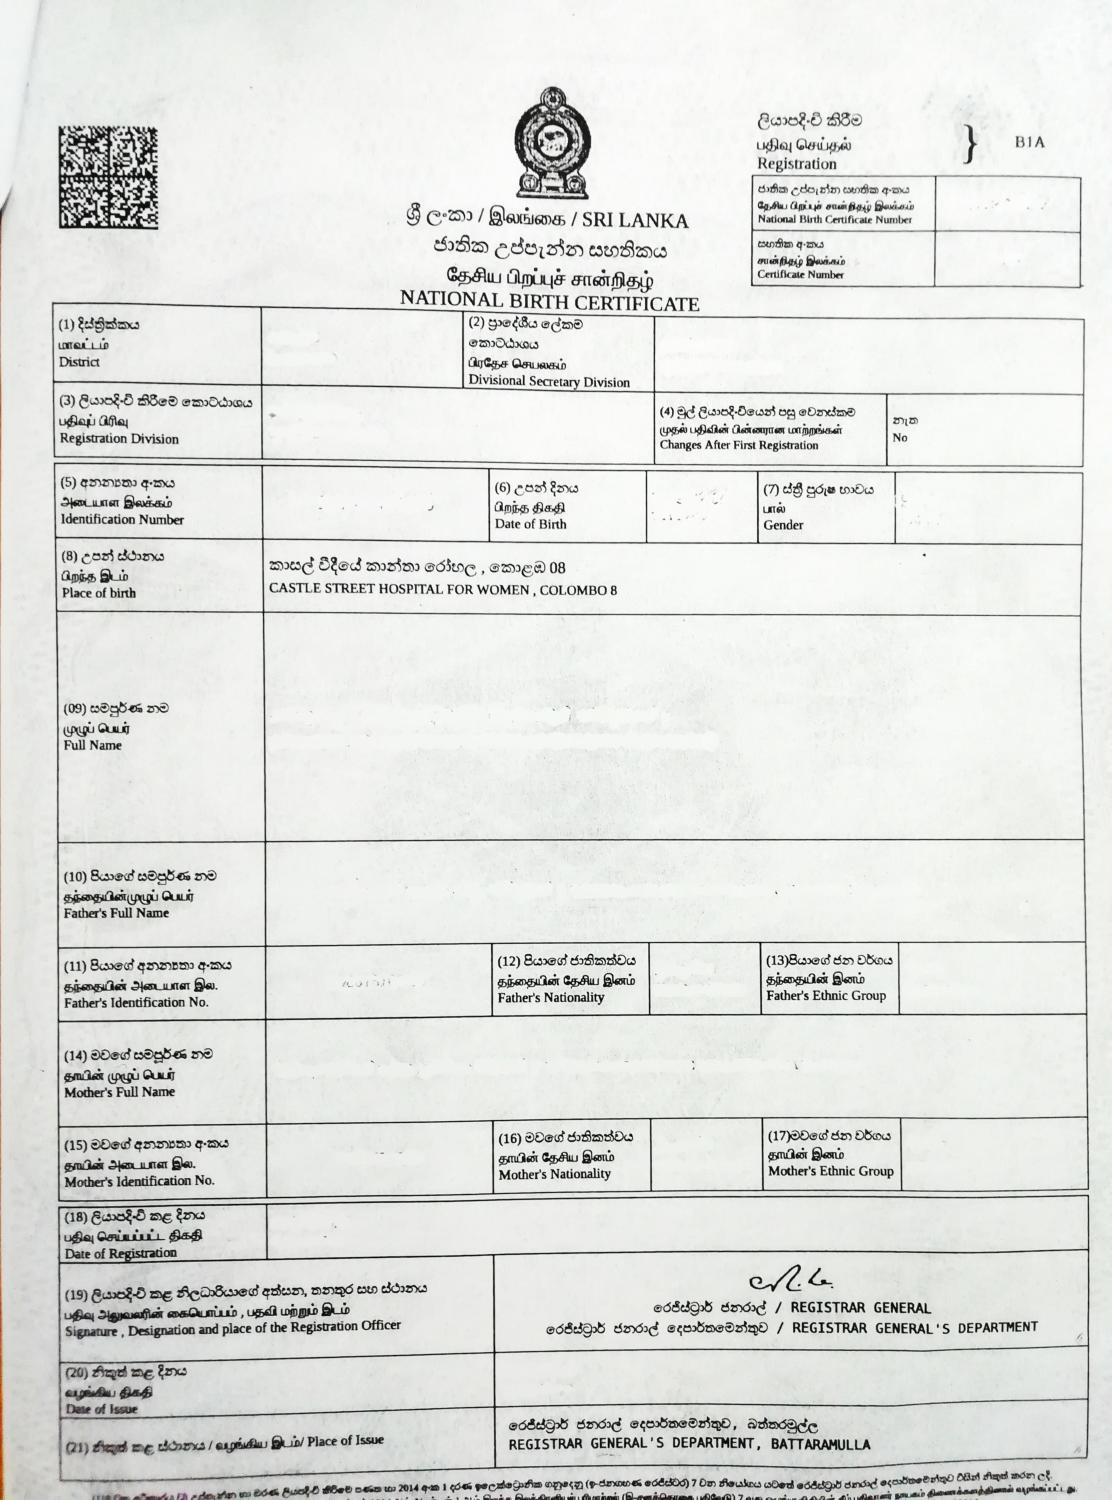 Copy of the National Birth Certificate page 001